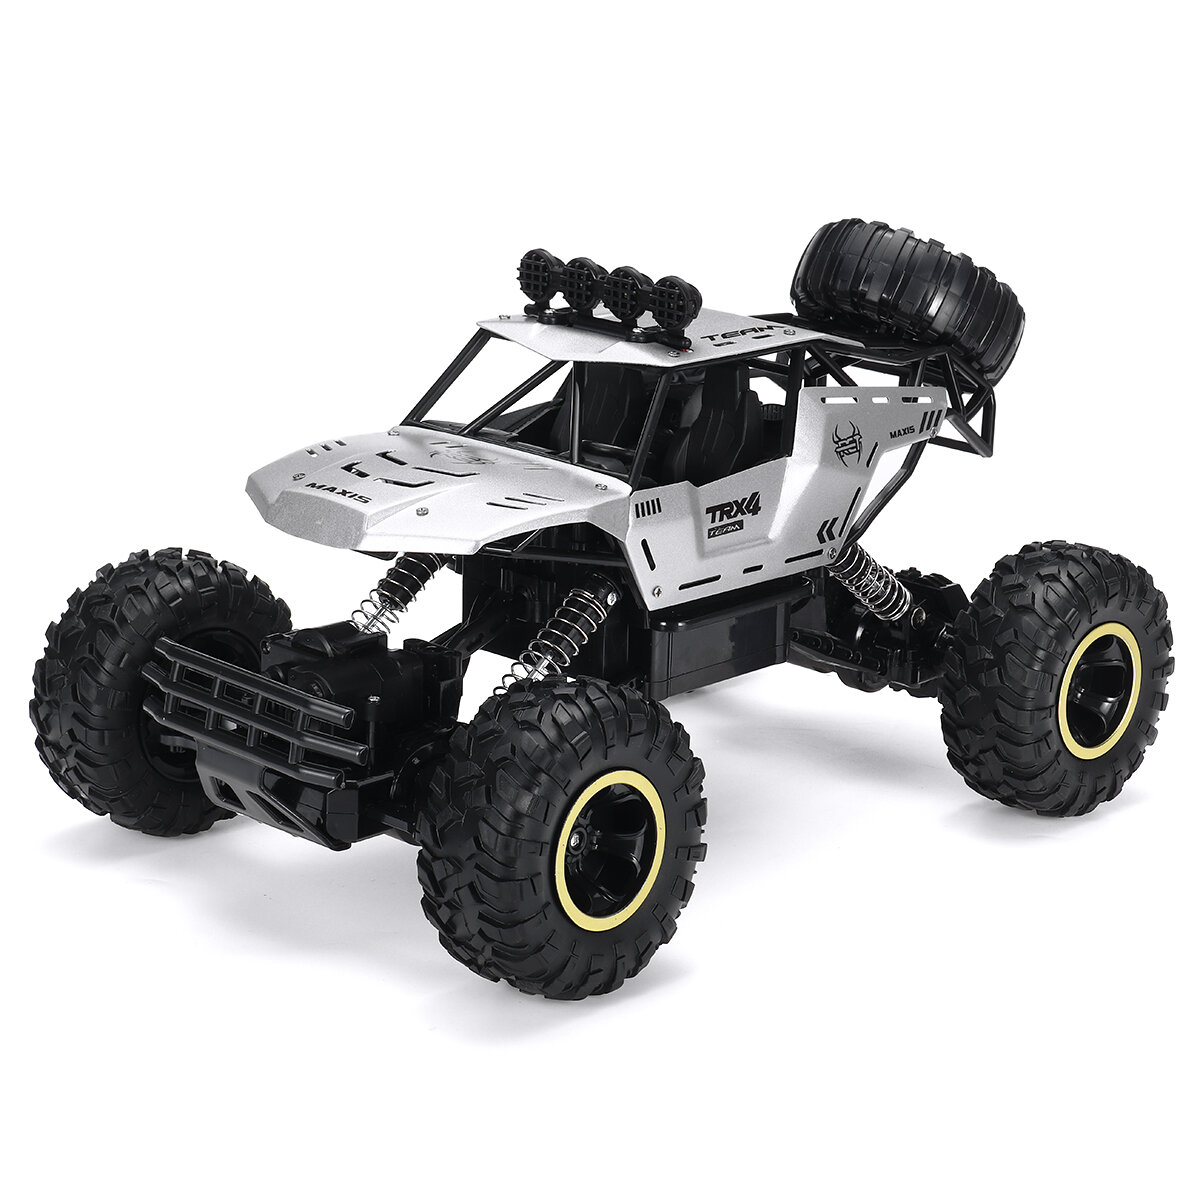 1/12 2.4G 2WD RC Car Crawler Truck Metal Body Vehicle Models Toys Indoor Outdoor Toys